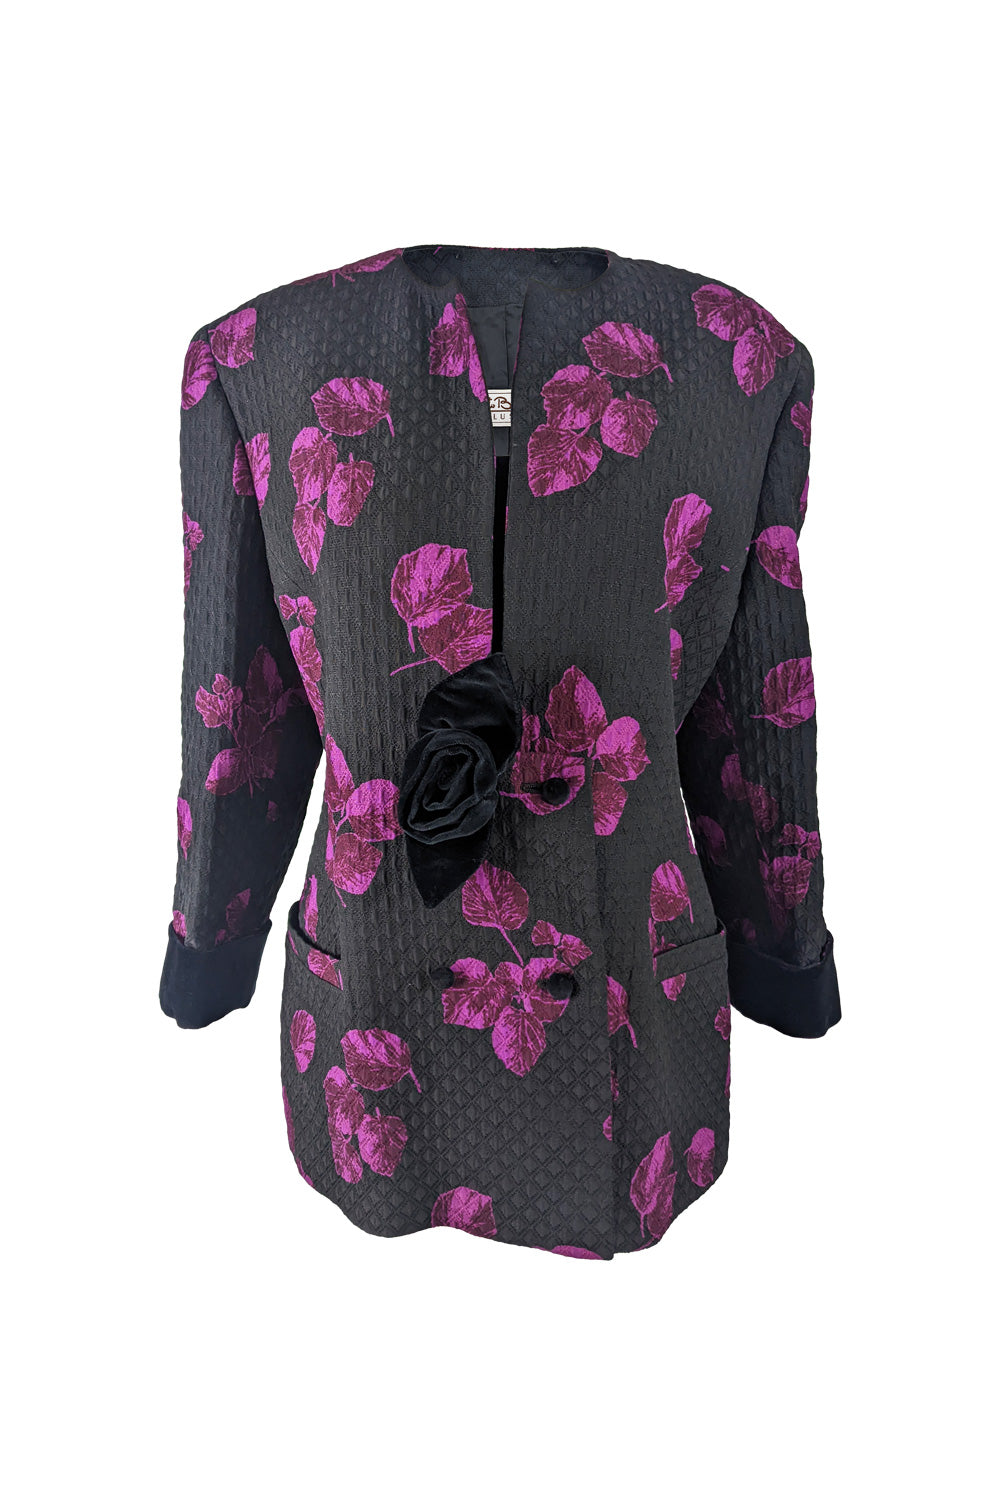 Renato Balestra Vintage Womens Floral Quilted Jacket, 1980s